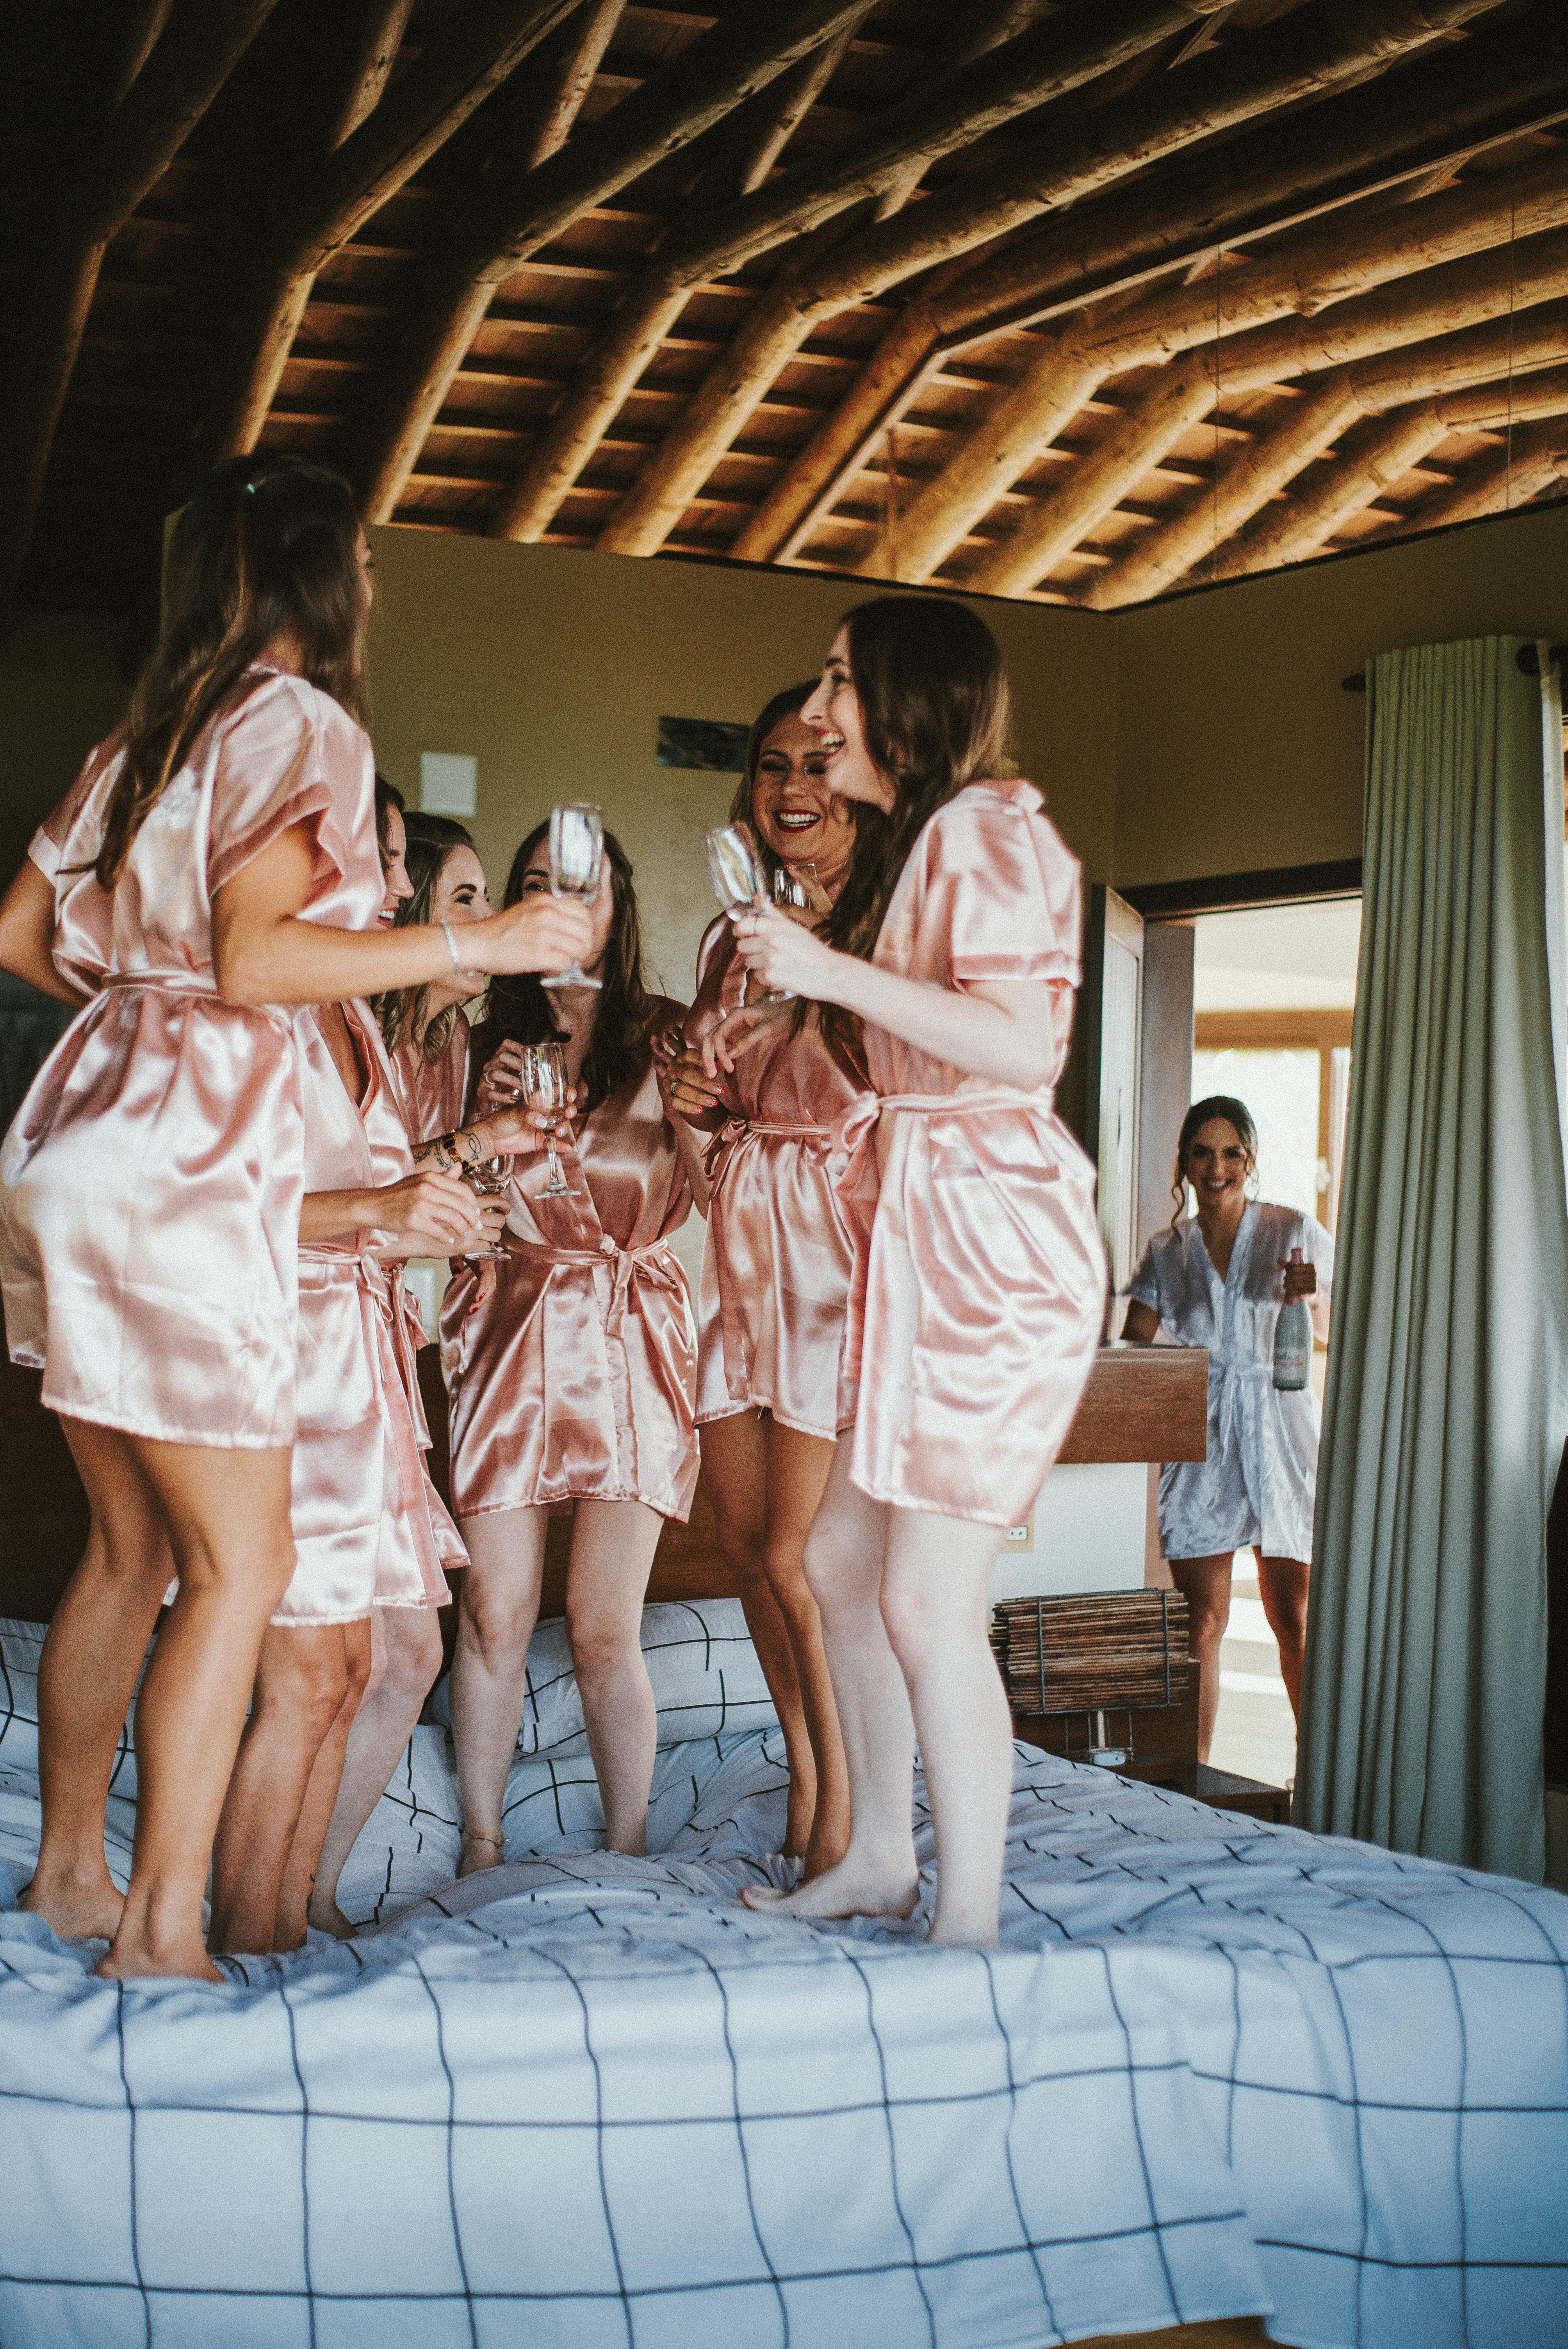 For illustration purposes only. Bridesmaids have fun jumping on a bed | Source: Pexels